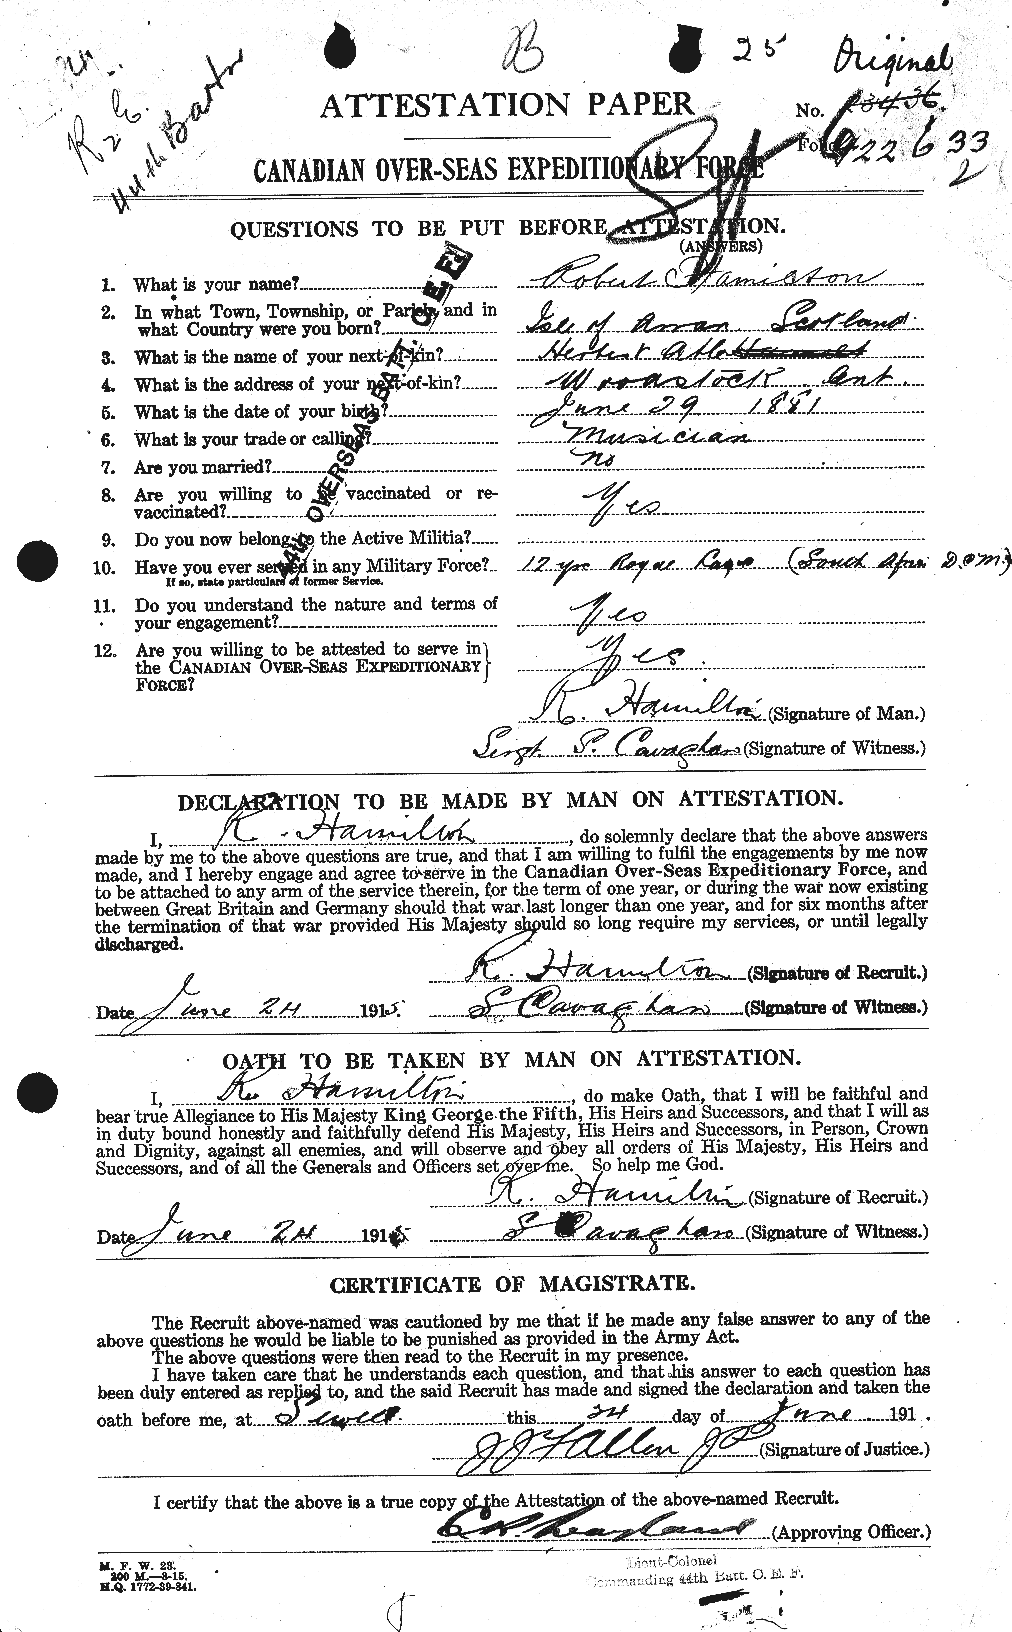 Personnel Records of the First World War - CEF 373233a